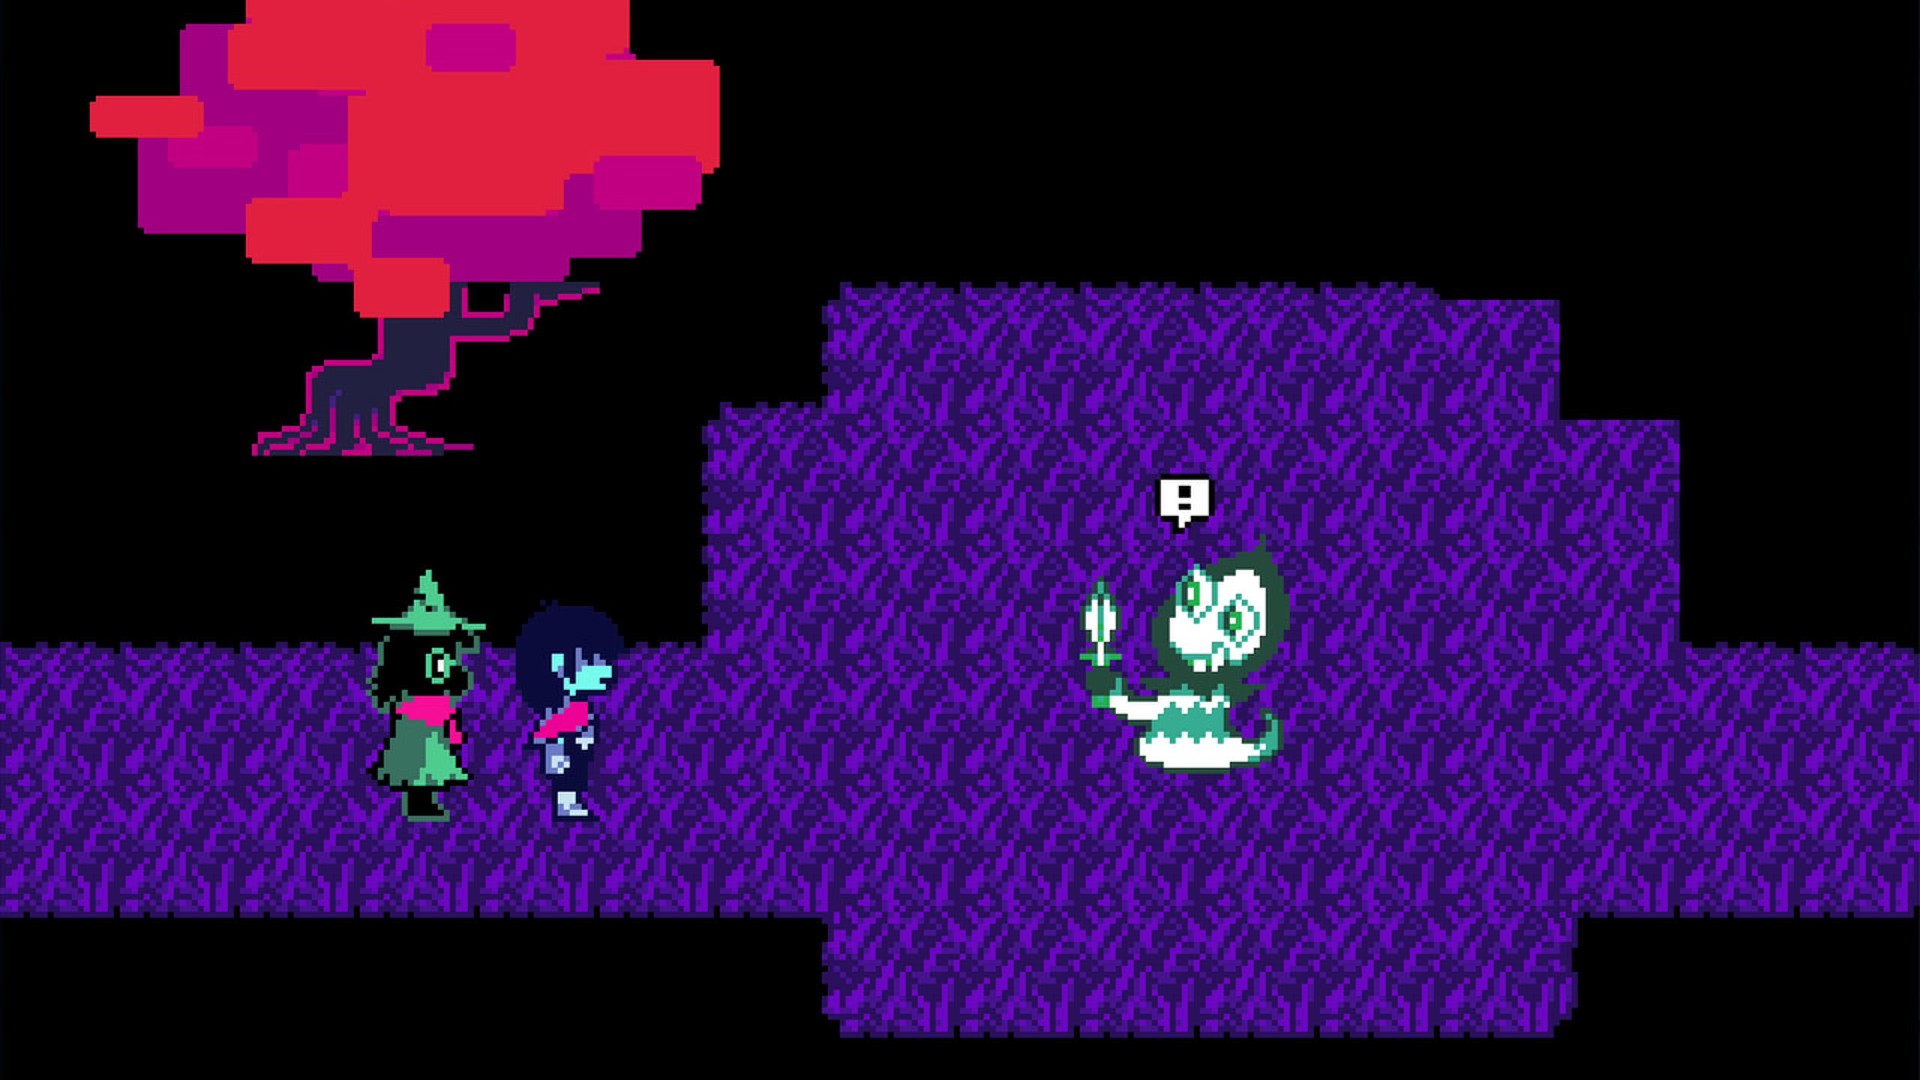 Deltarune isn't in the Undertale world, will take a while to finish